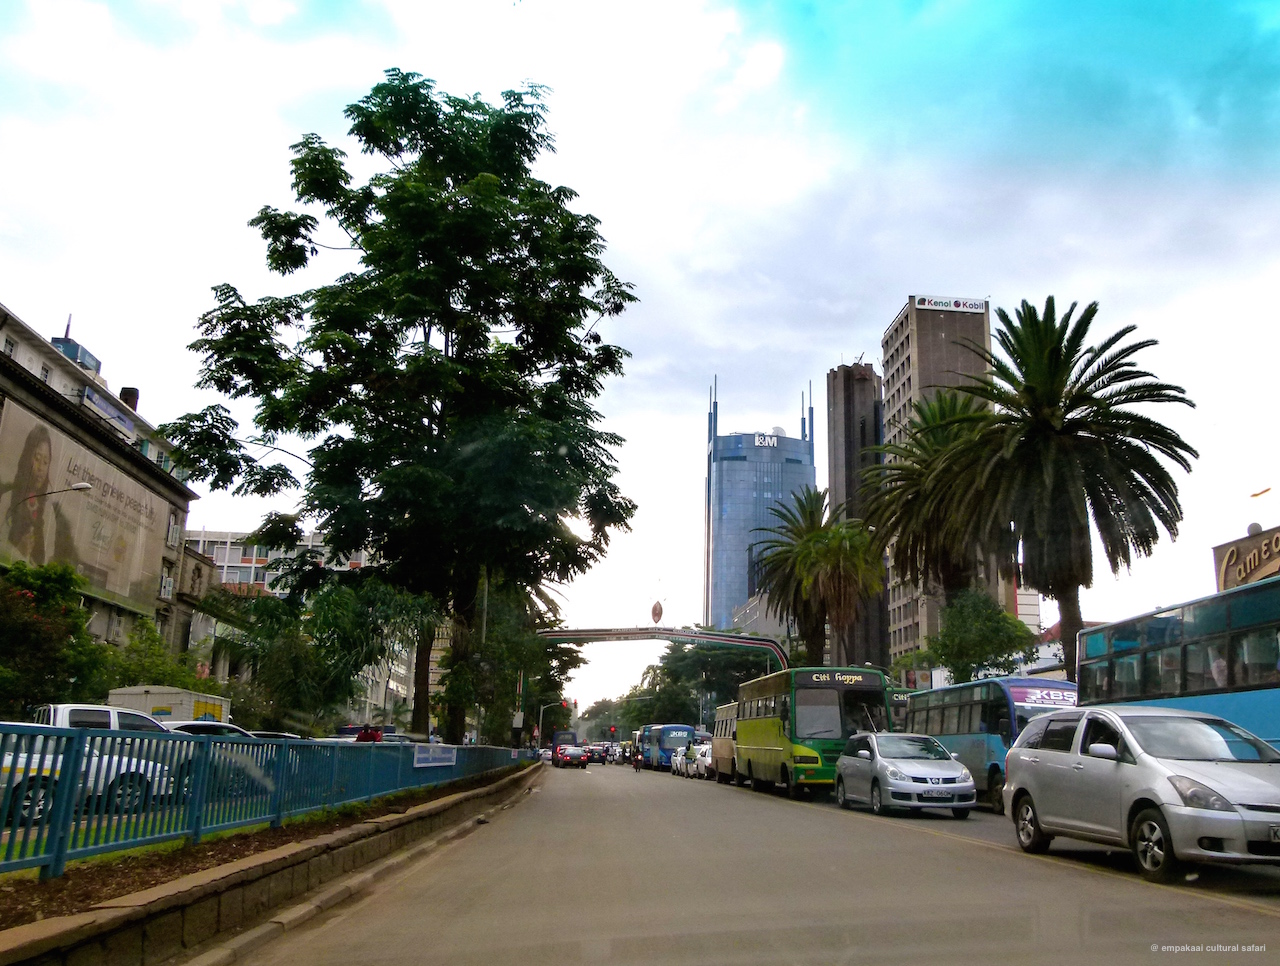 Nairobi was very hectic that afternoon with its heavy traffic, but we could catch a glimpse of a city center.